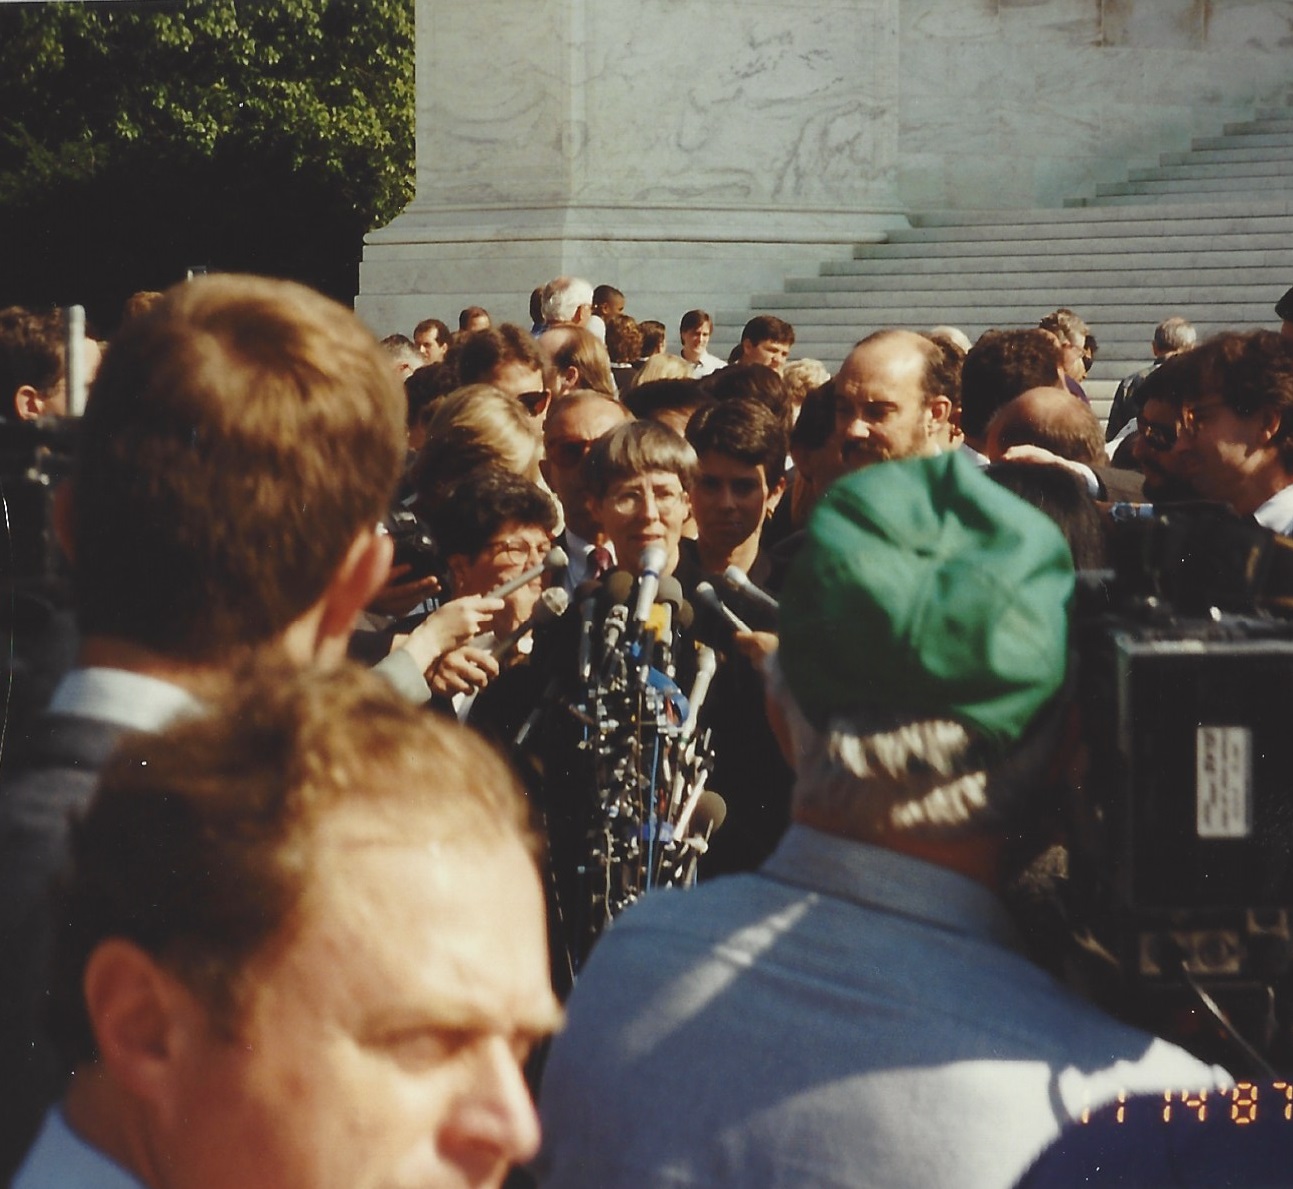 Photo of Jean Dubofsky giving a press conference. She is speaking in front of a tower of various microphones, surrounded by a large crowd of press people listening to her speak.